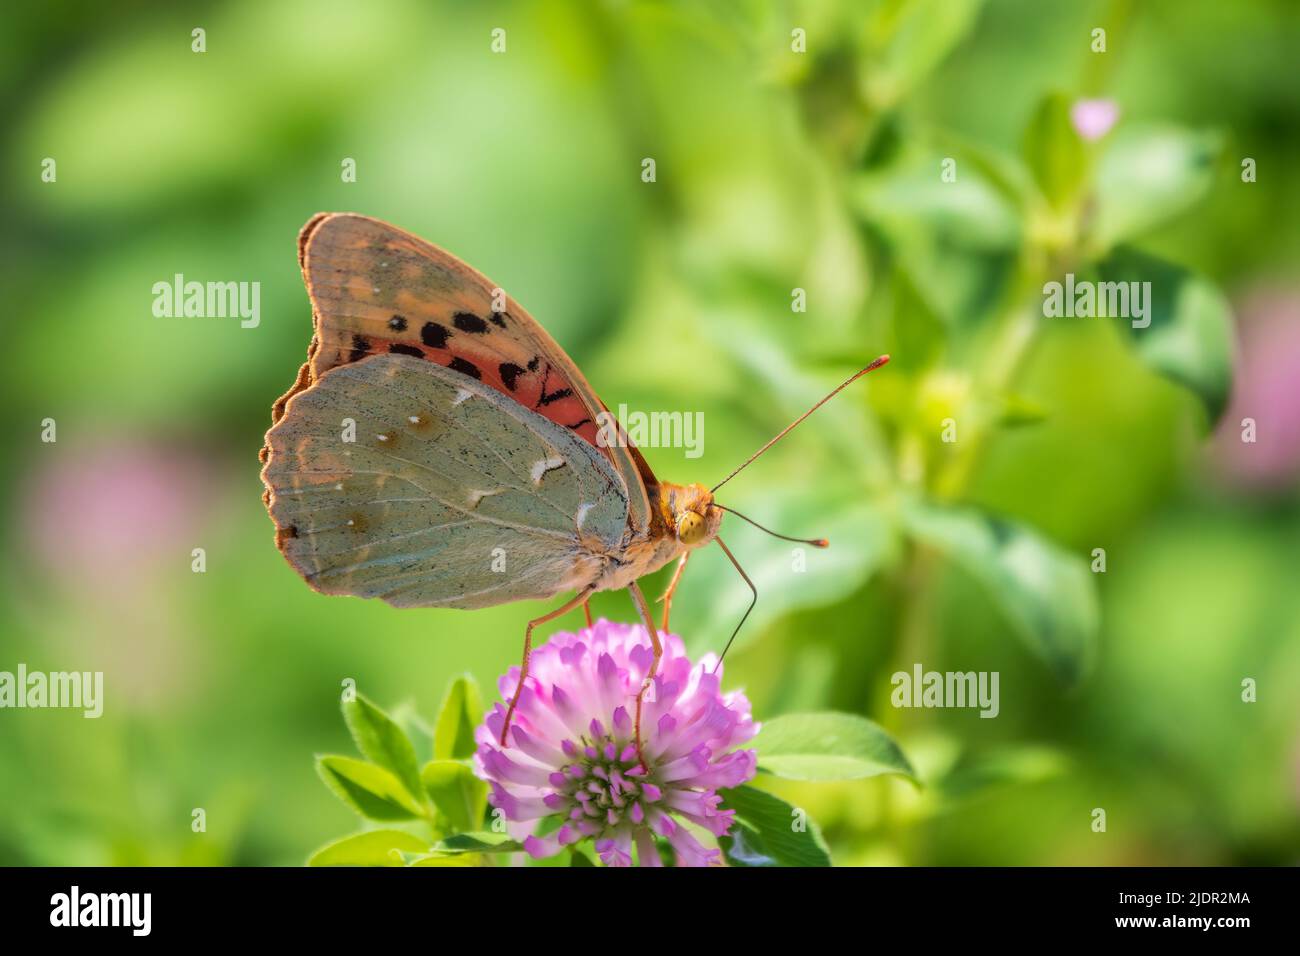 The dark green fritillary butterfly collects nectar on flower. Speyeria aglaja, previously known as Argynnis aglaja is a species of butterfly in the f Stock Photo